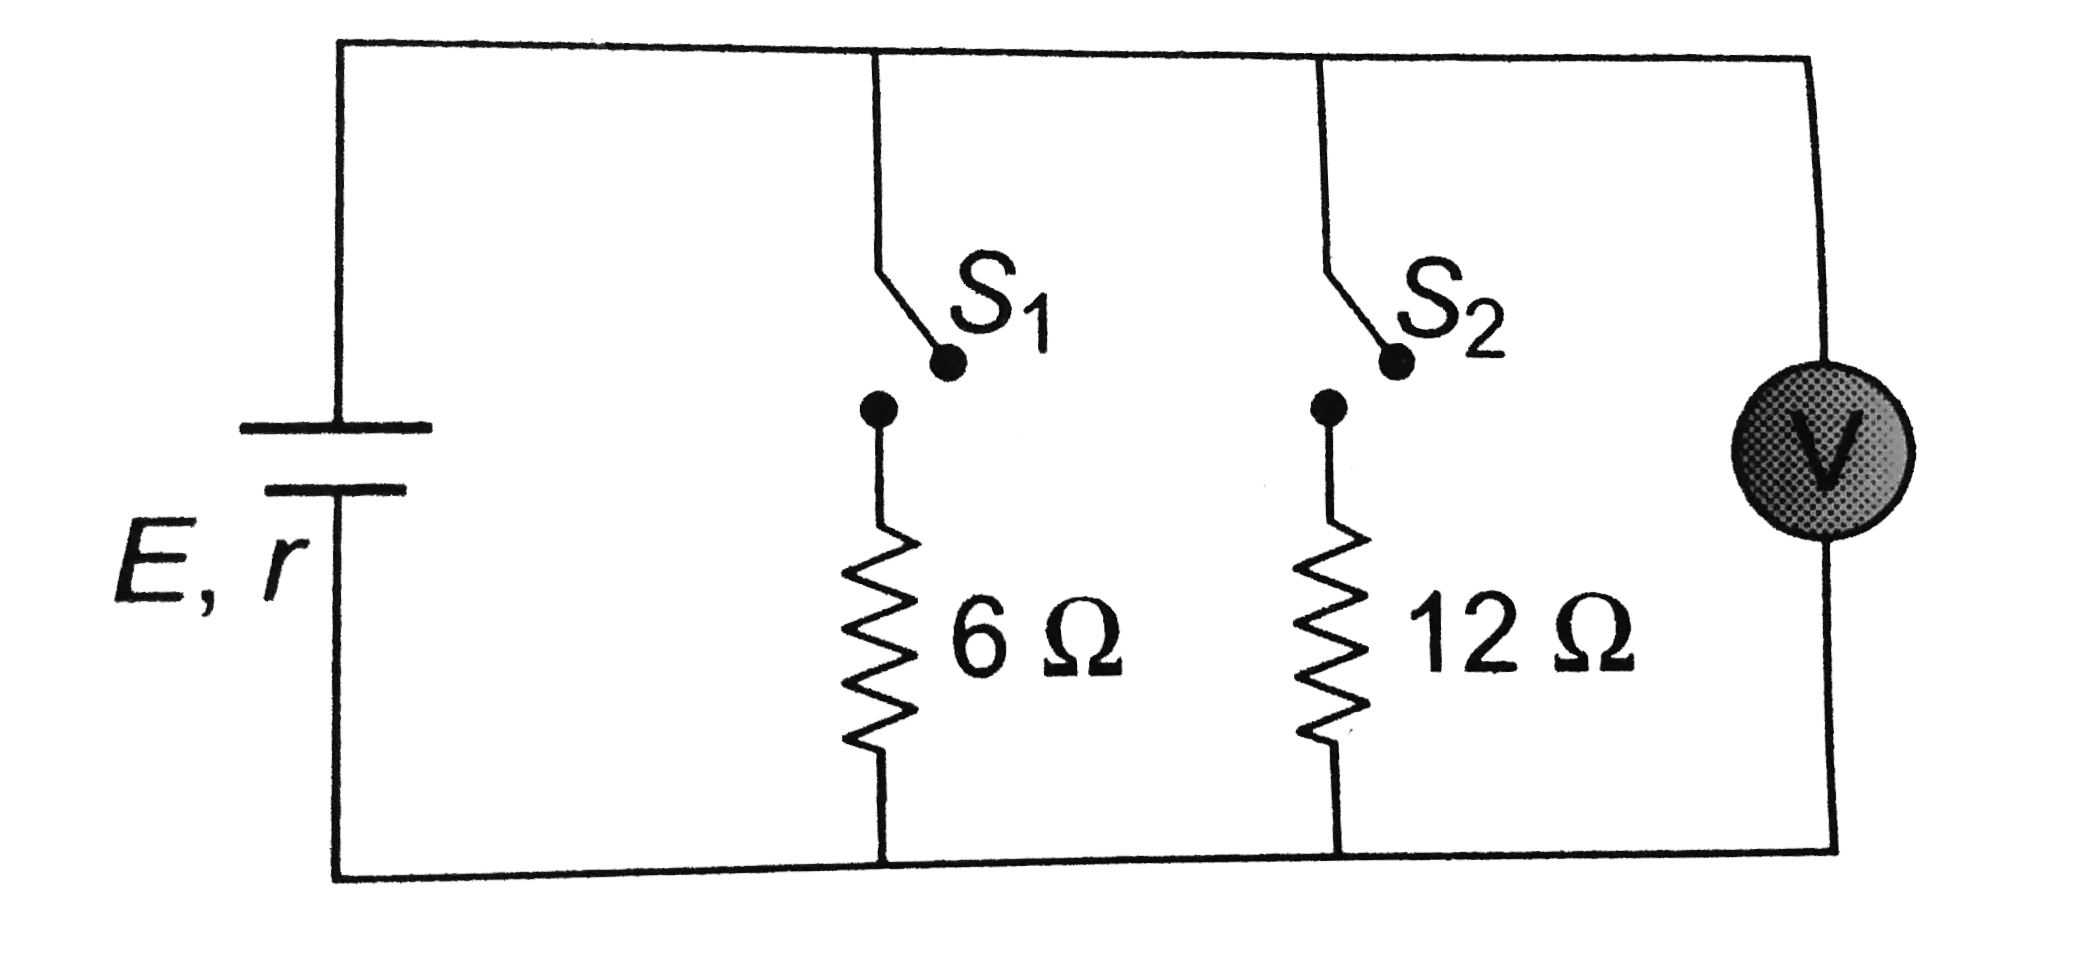 In the circuit shown, when switch S(1) is closed and S(2) is open, the ideal voltmeter shows a reaiding of 18 V. When switch S(2) is closed and S(1) is open, the reading of voltmeter is 24 V. When S(1) and S(2) both are closed, the voltmeter reading will be